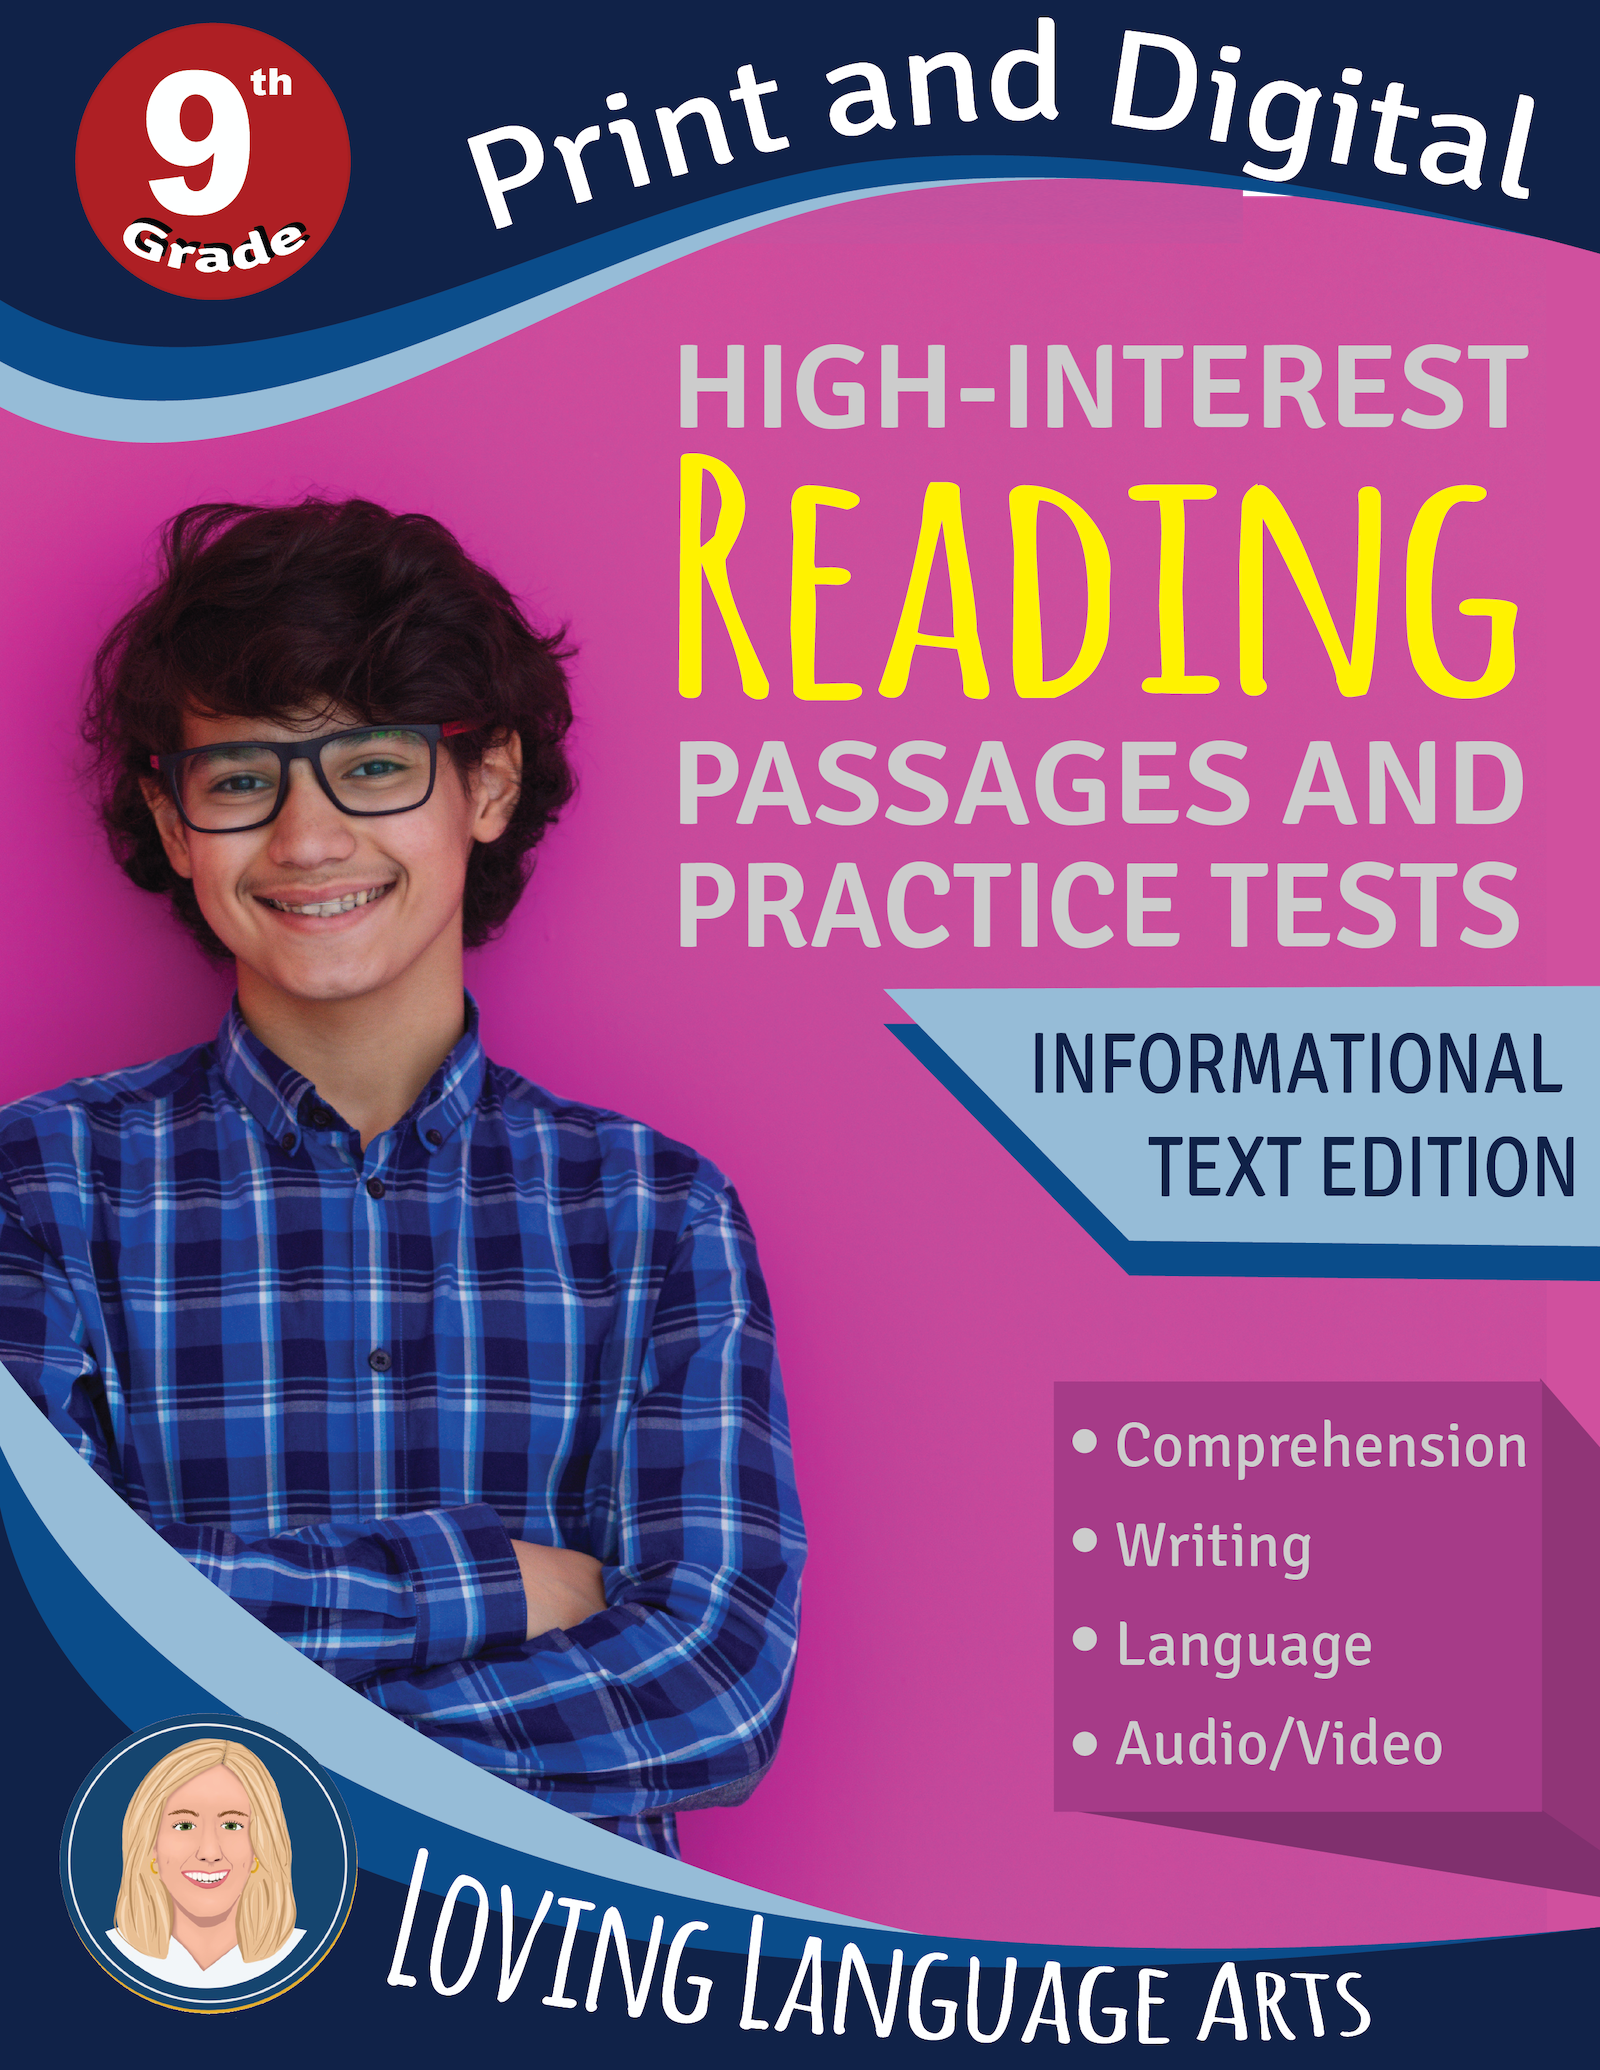 9th grade language arts workbook - High-interest passages and practice tests.